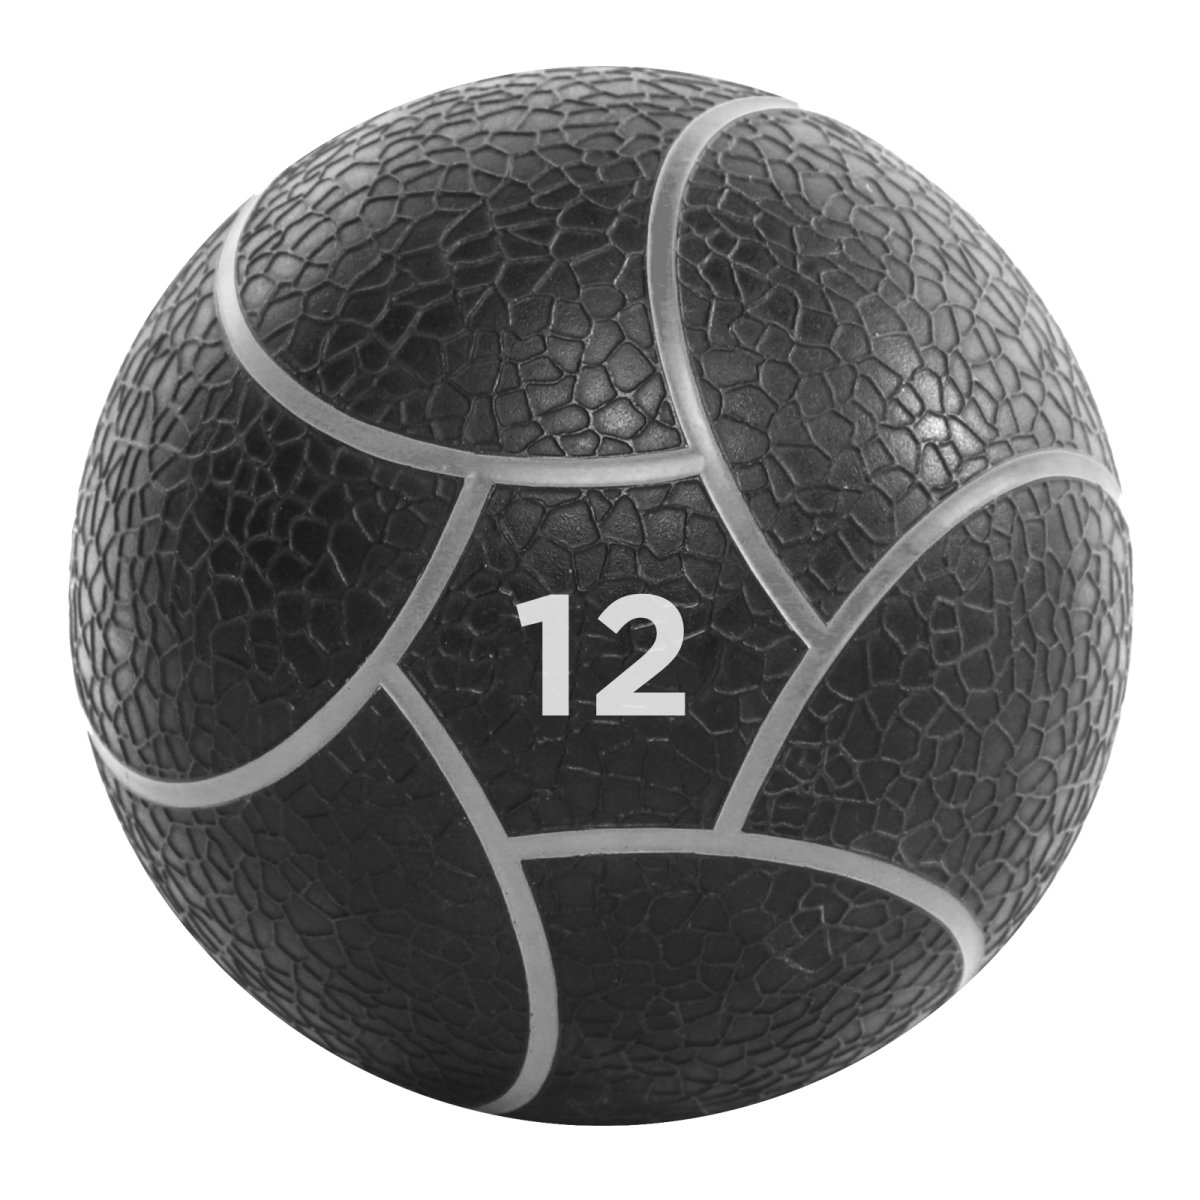 Picture of Power Systems 25712 Elite Power Med Ball Prime 12 lb. Gray